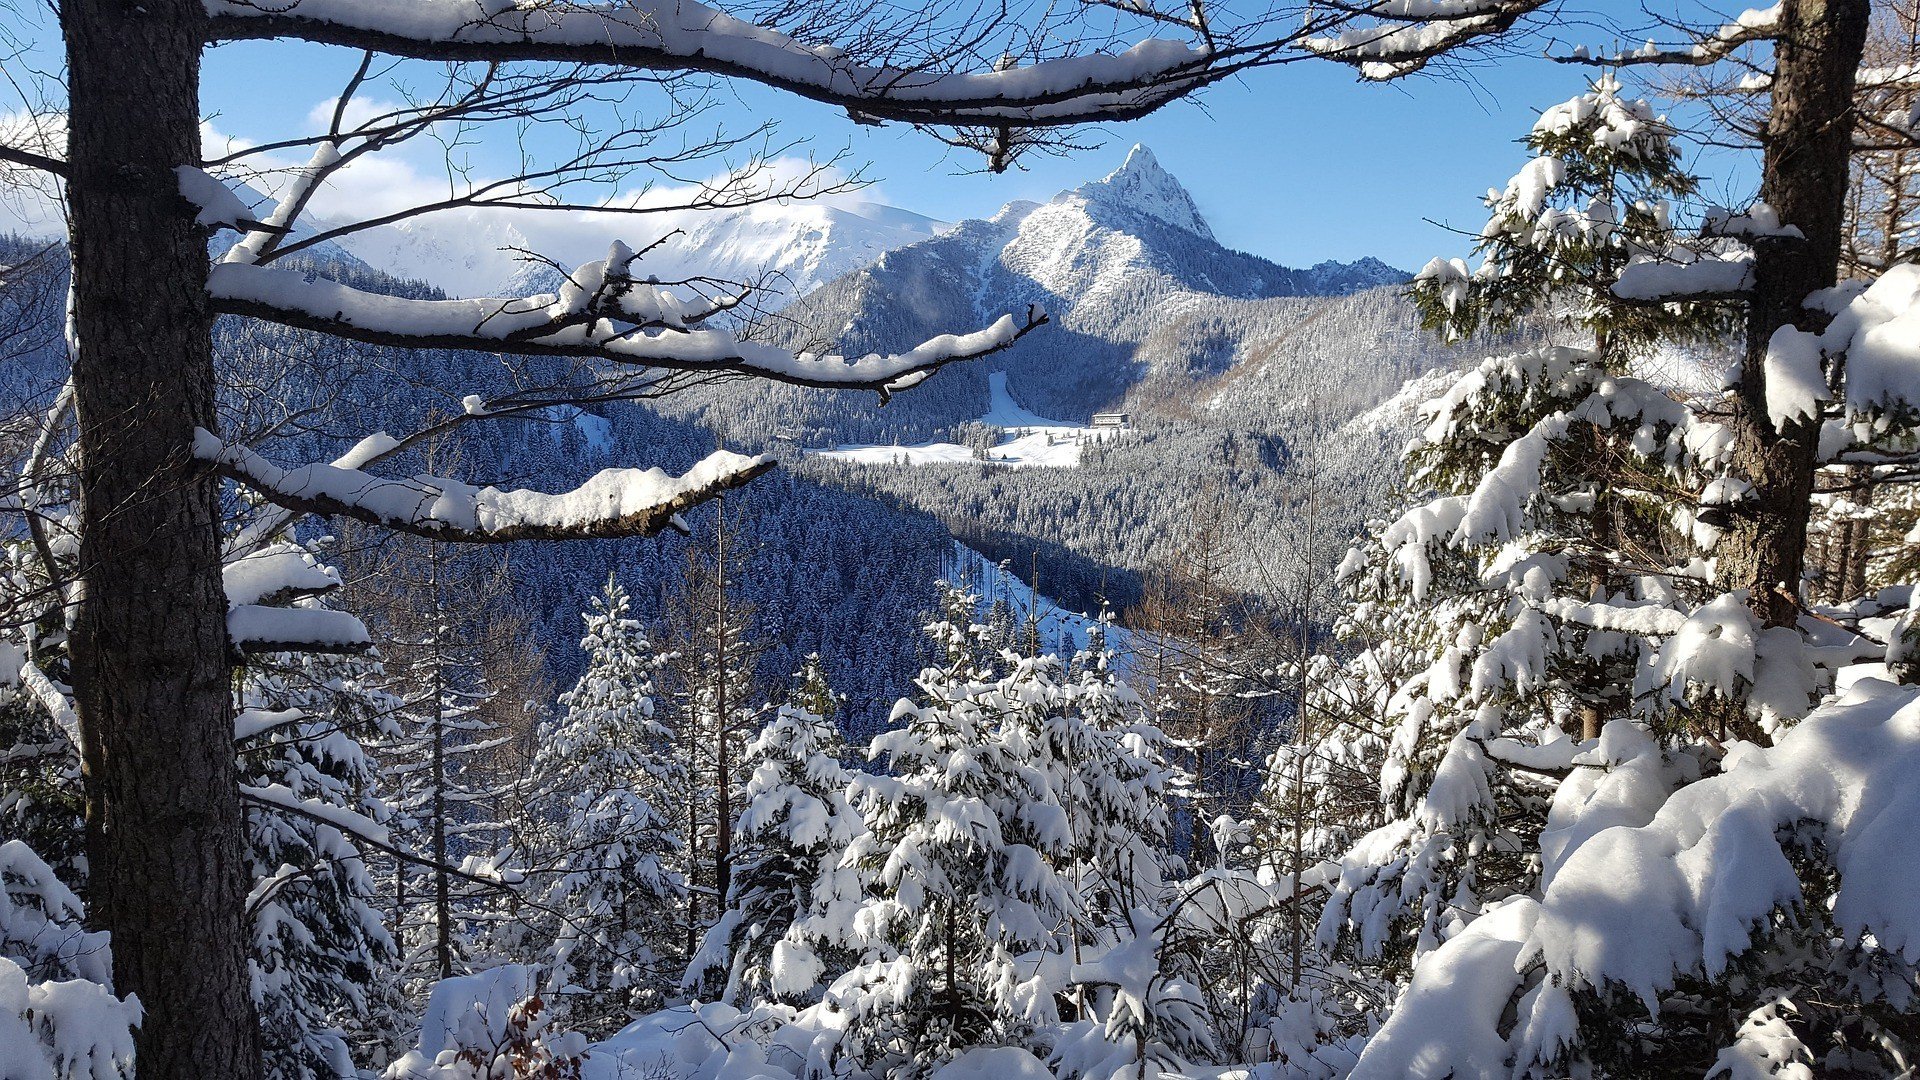 What can you do in winter if you don’t ski? Winter Zakopane attractions.